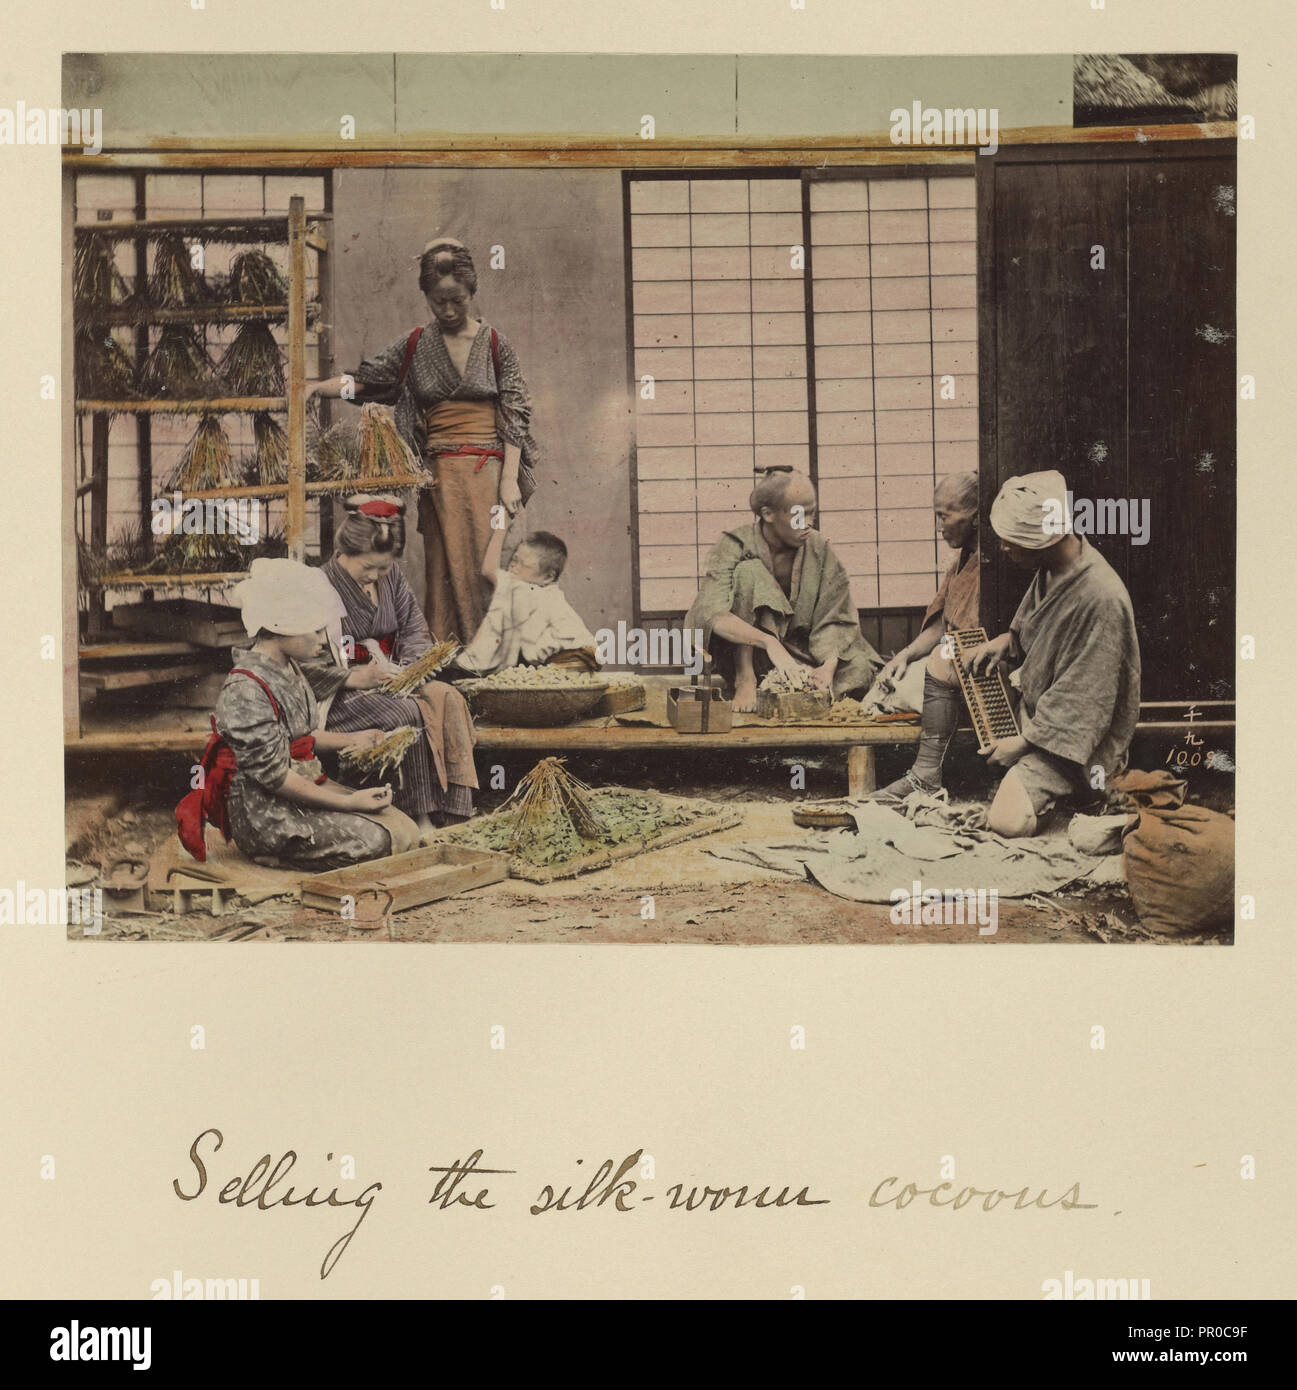 Selling the Silk-worm Cocoons; Shinichi Suzuki, Japanese, 1835 - 1919, Japan; about 1873 - 1883; Hand-colored Albumen silver Stock Photo